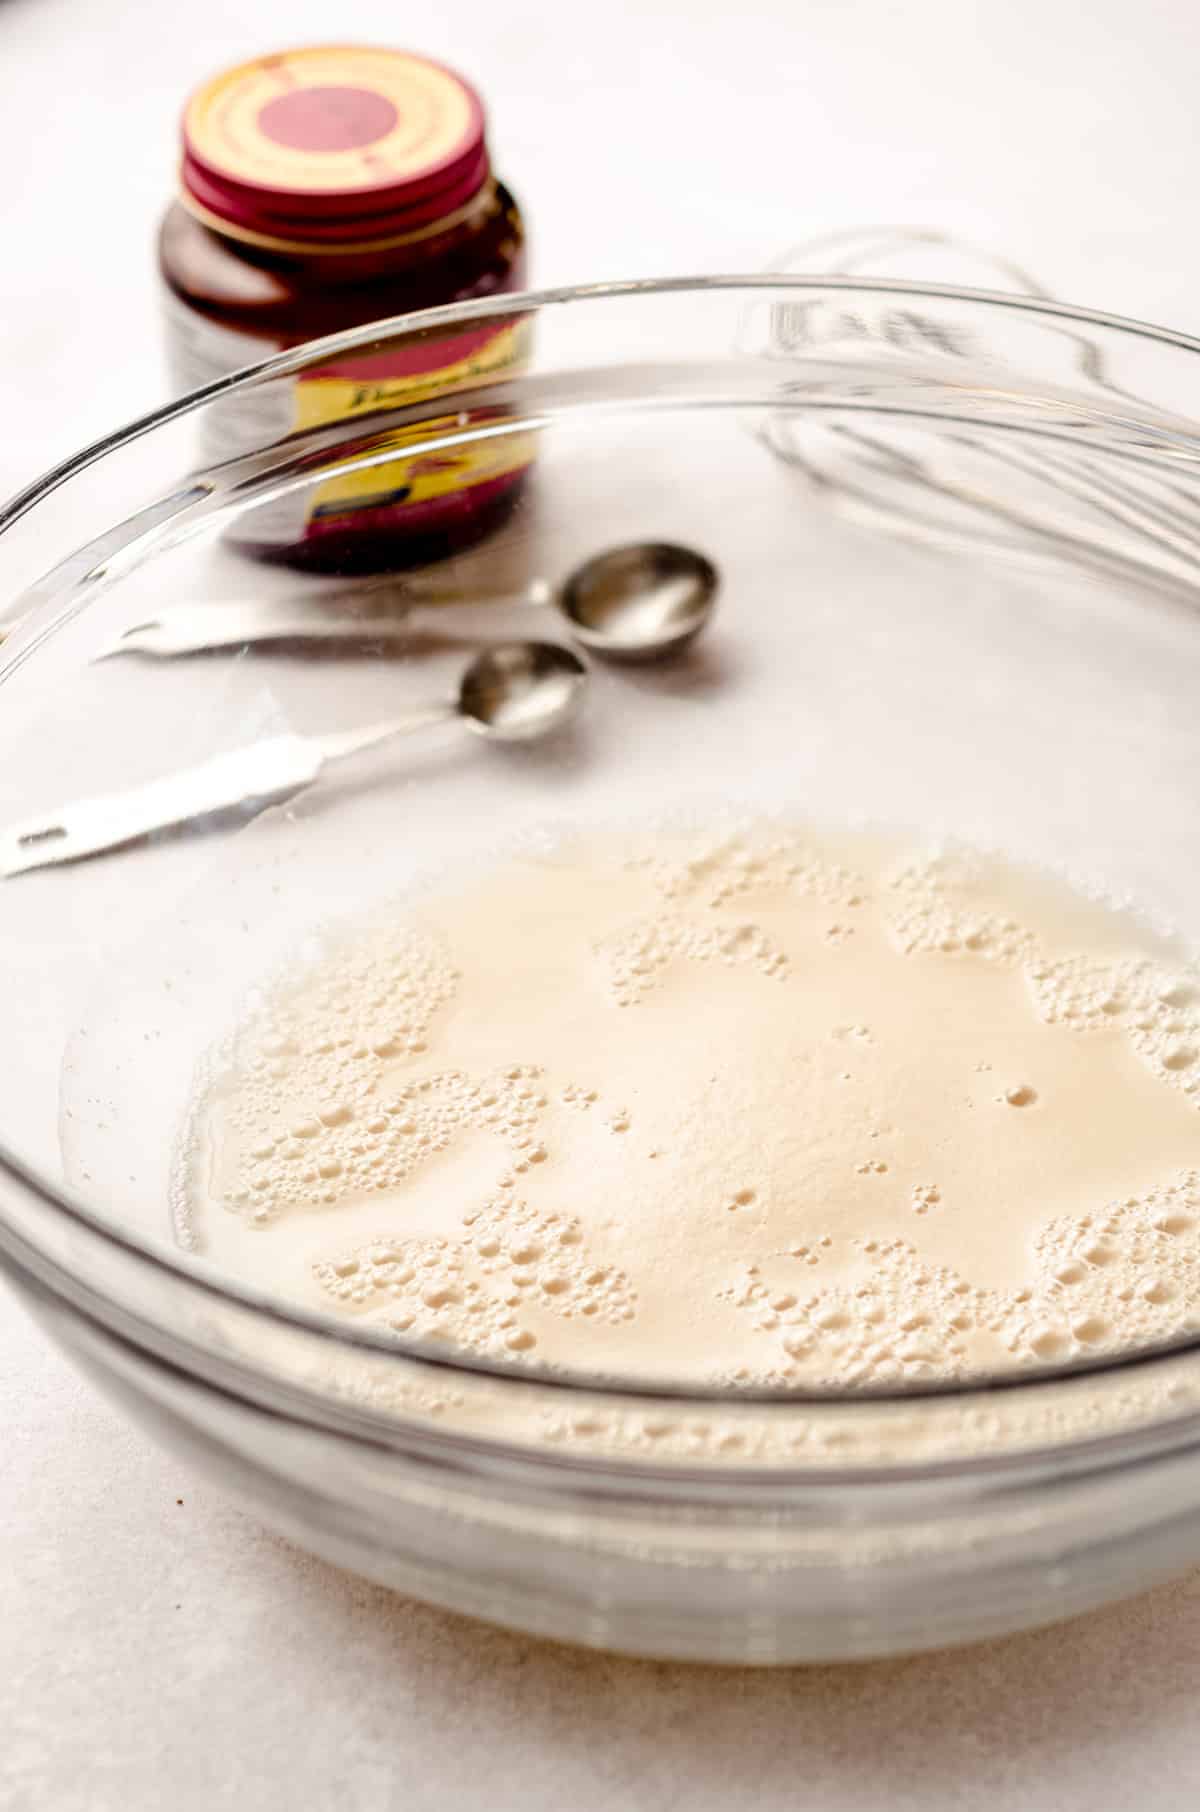 activated yeast in a glass bowl